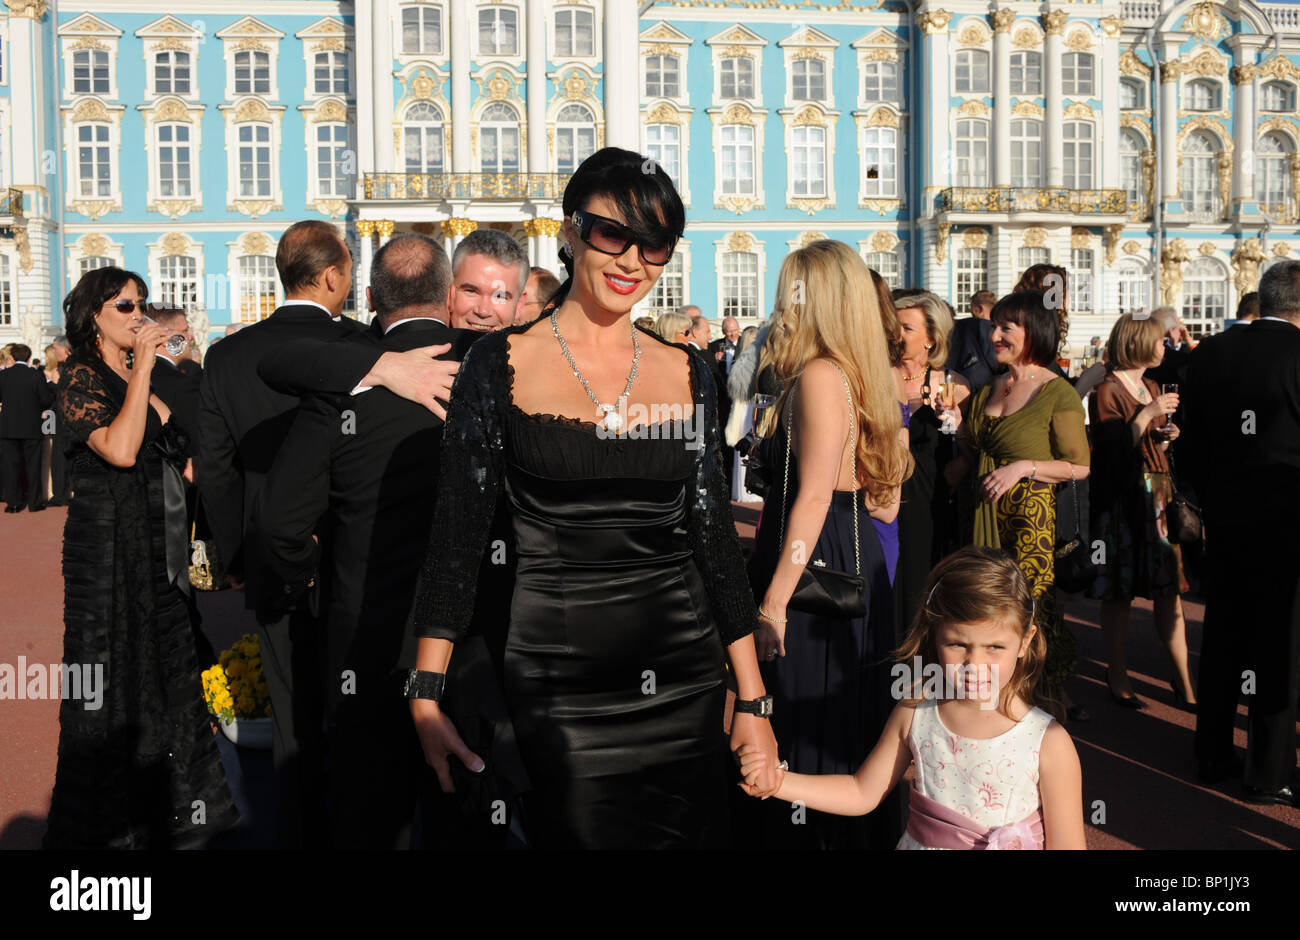 Festivities in front of the Catherine Palace, Saint Petersburg, Russia Stock Photo